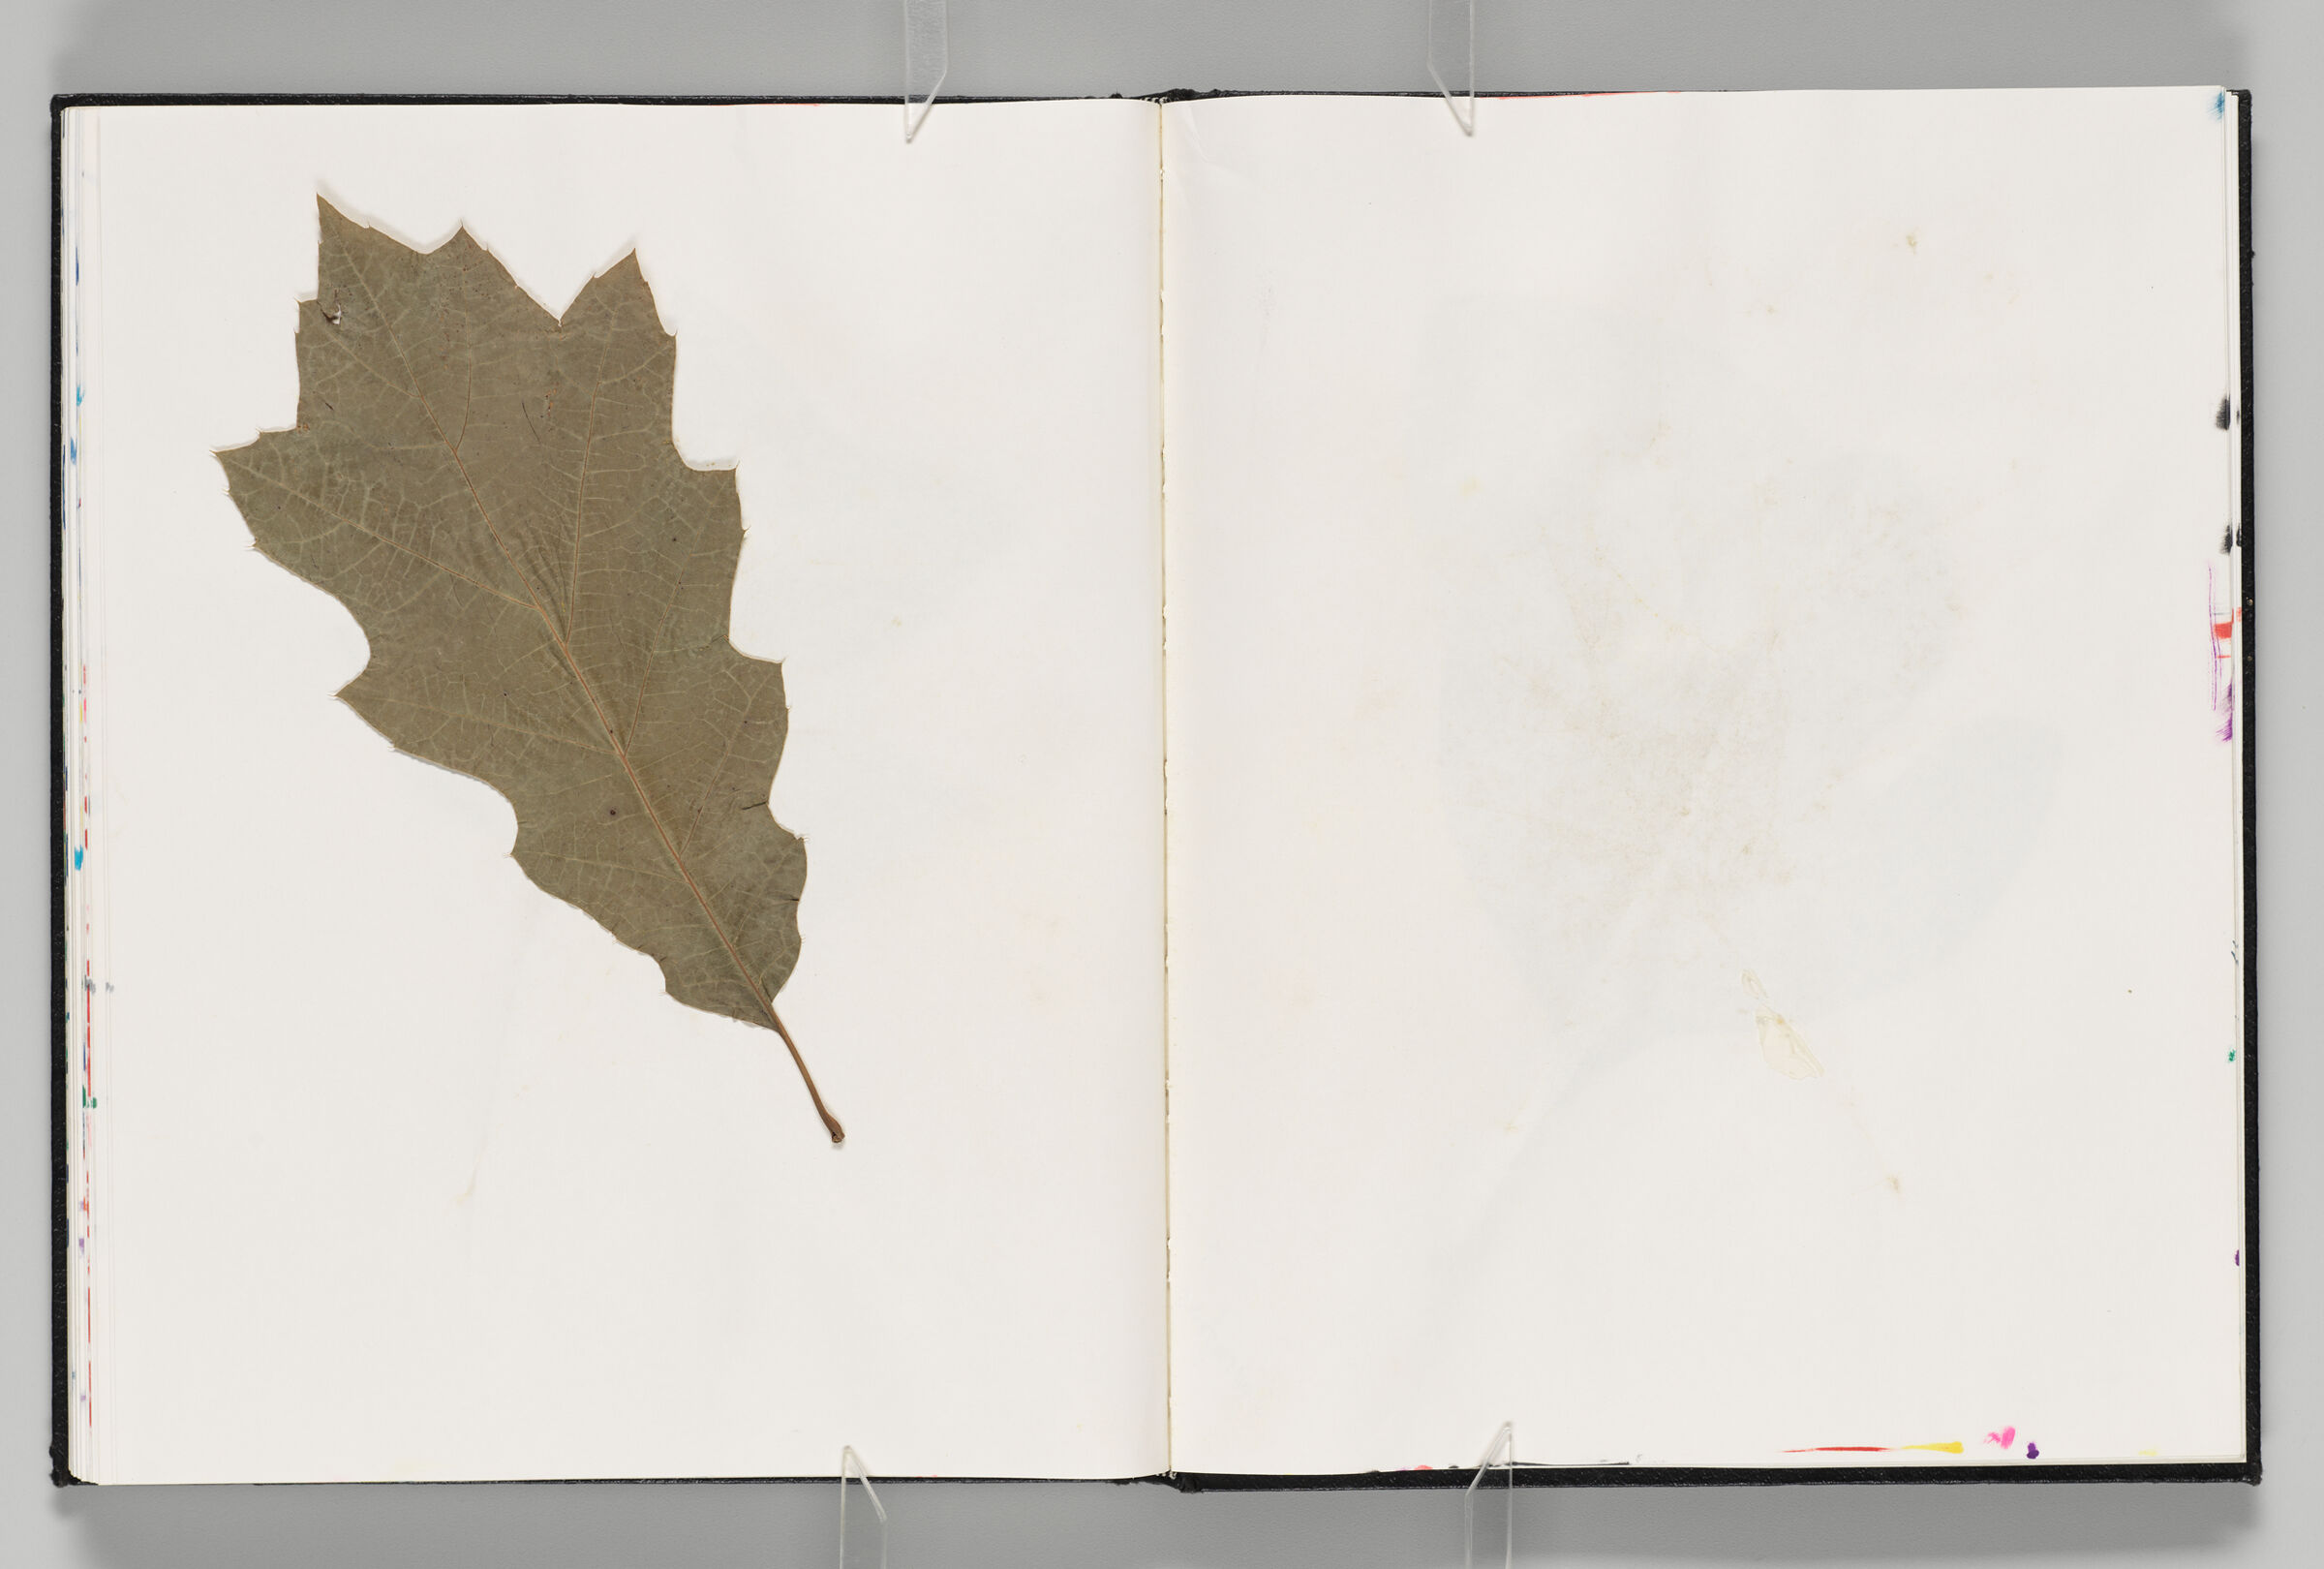 Untitled (Pressed And Adhered Leaf, Left Page); Untitled (Blank, Right Page)